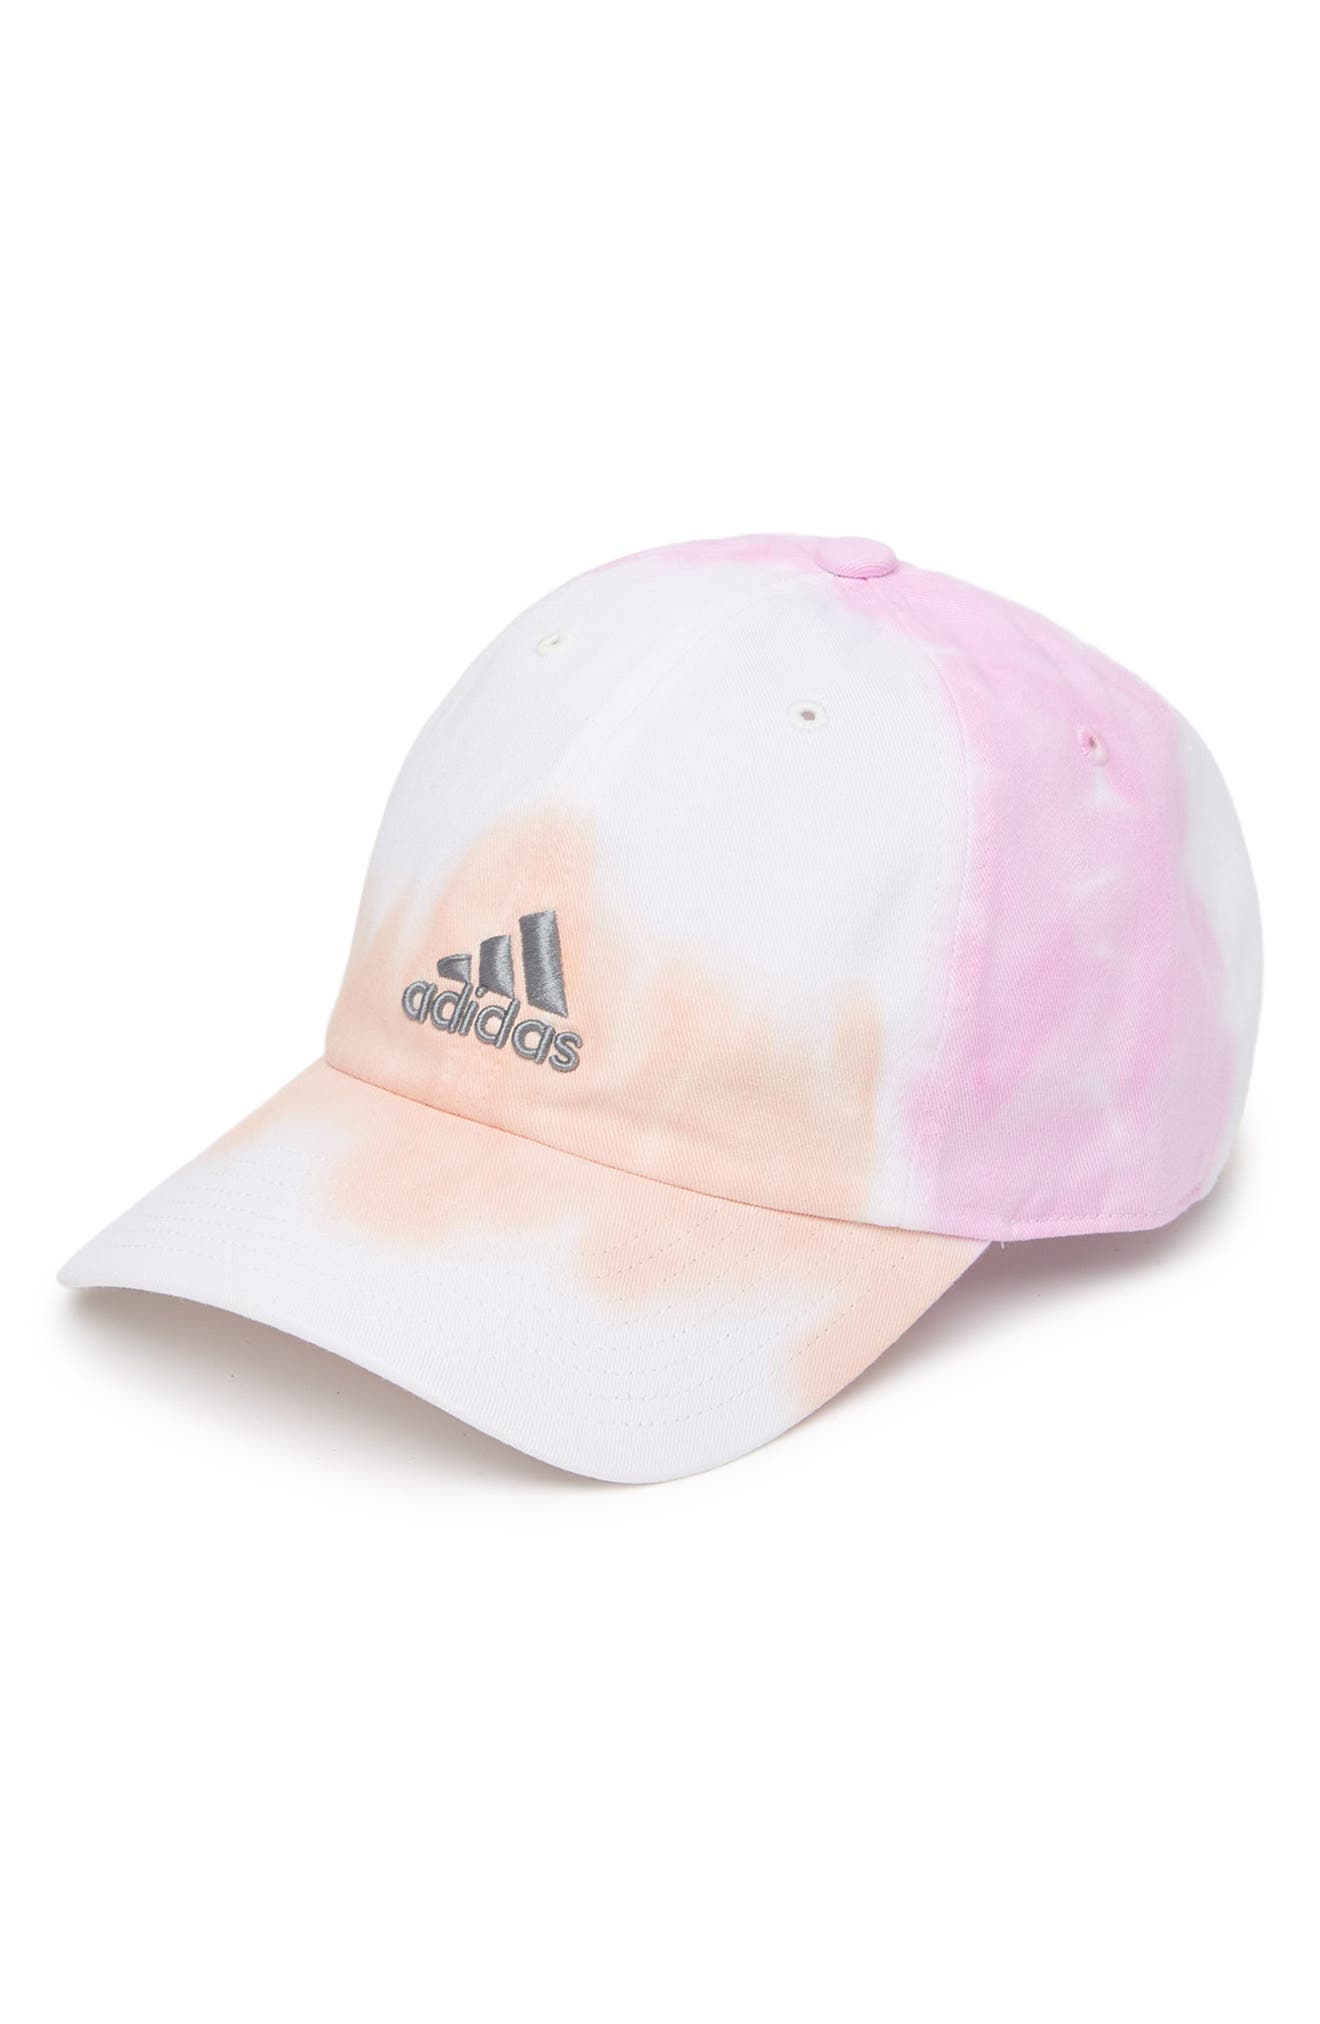 Adidas Originals Relaxed Washed Baseball Cap In Light Pink